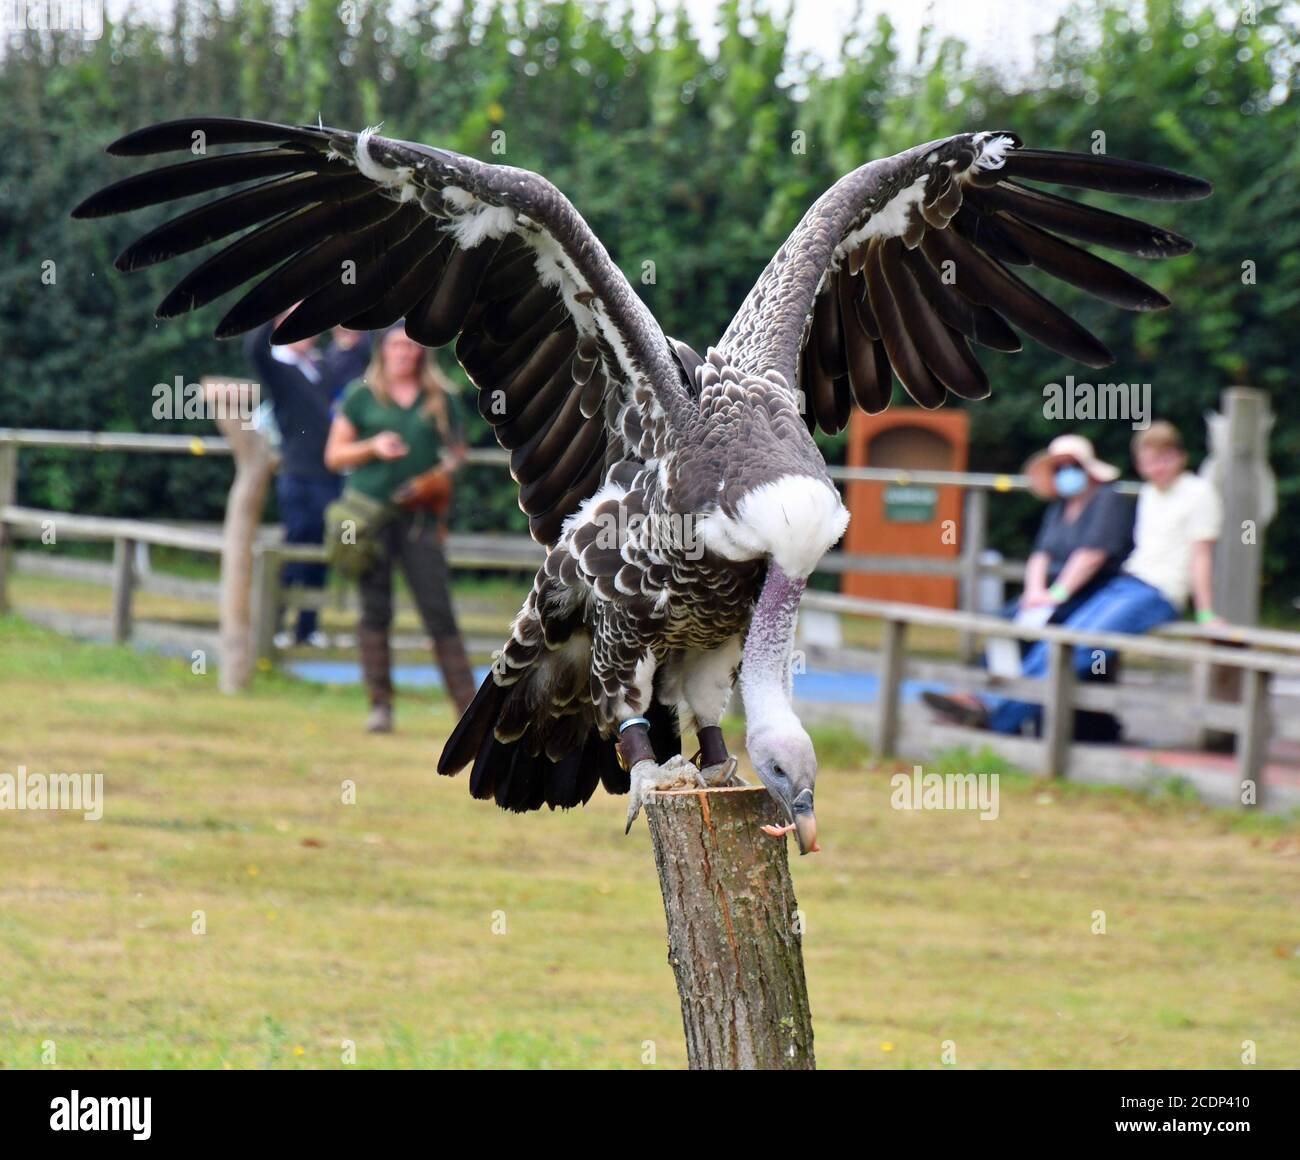 Vulture in the birds of prey display at Suffolk Owl Sanctuary, Stonham Aspal, Suffolk, UK Stock Photo